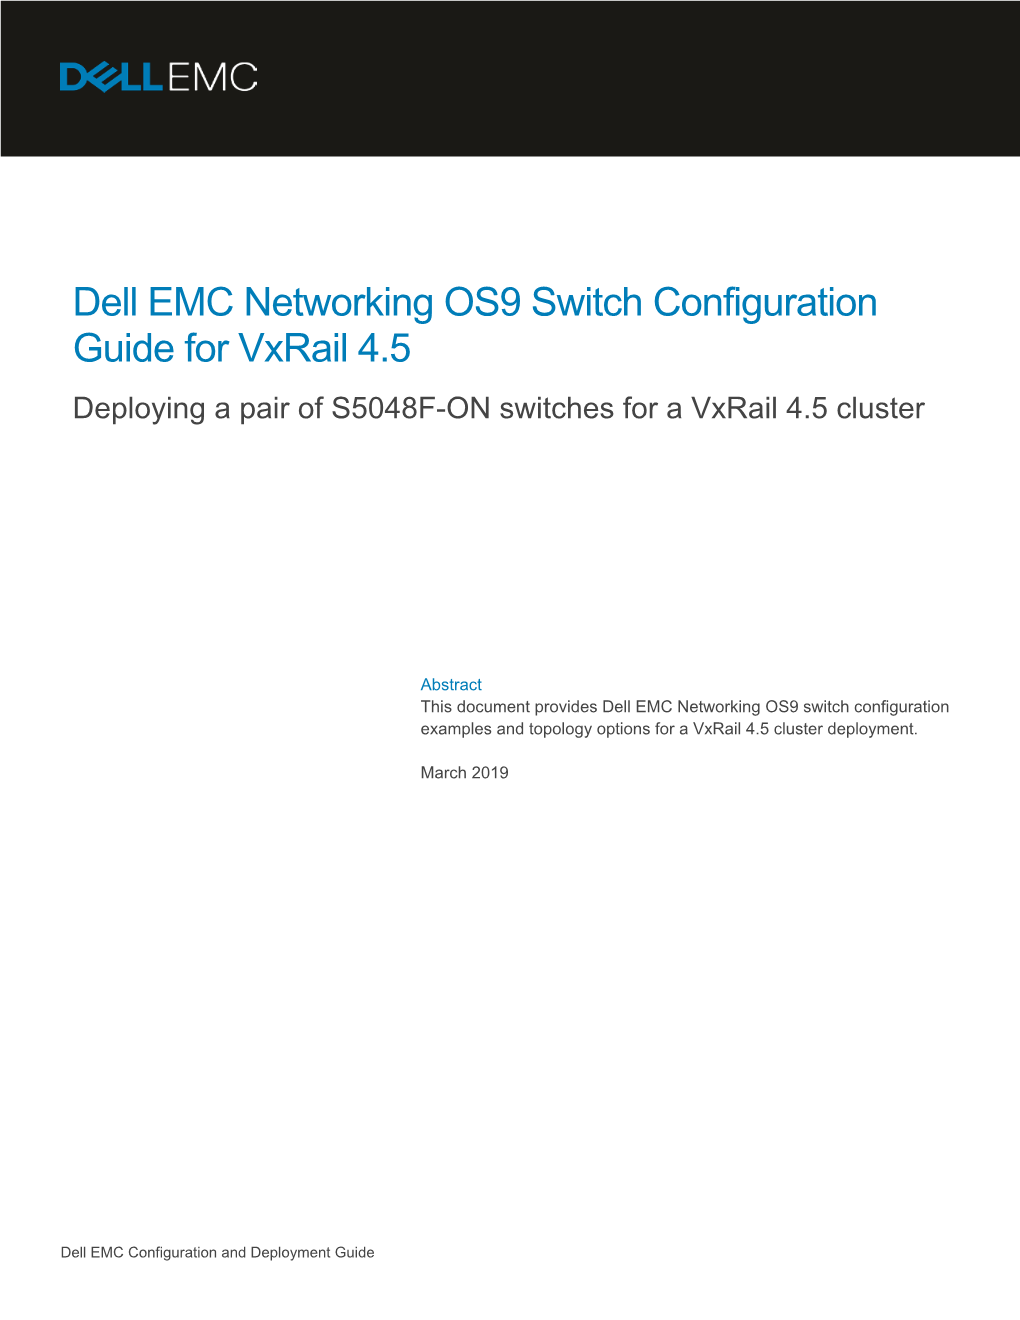 Dell EMC Networking OS9 Switch Configuration Guide for Vxrail 4.5 Deploying a Pair of S5048F-ON Switches for a Vxrail 4.5 Cluster